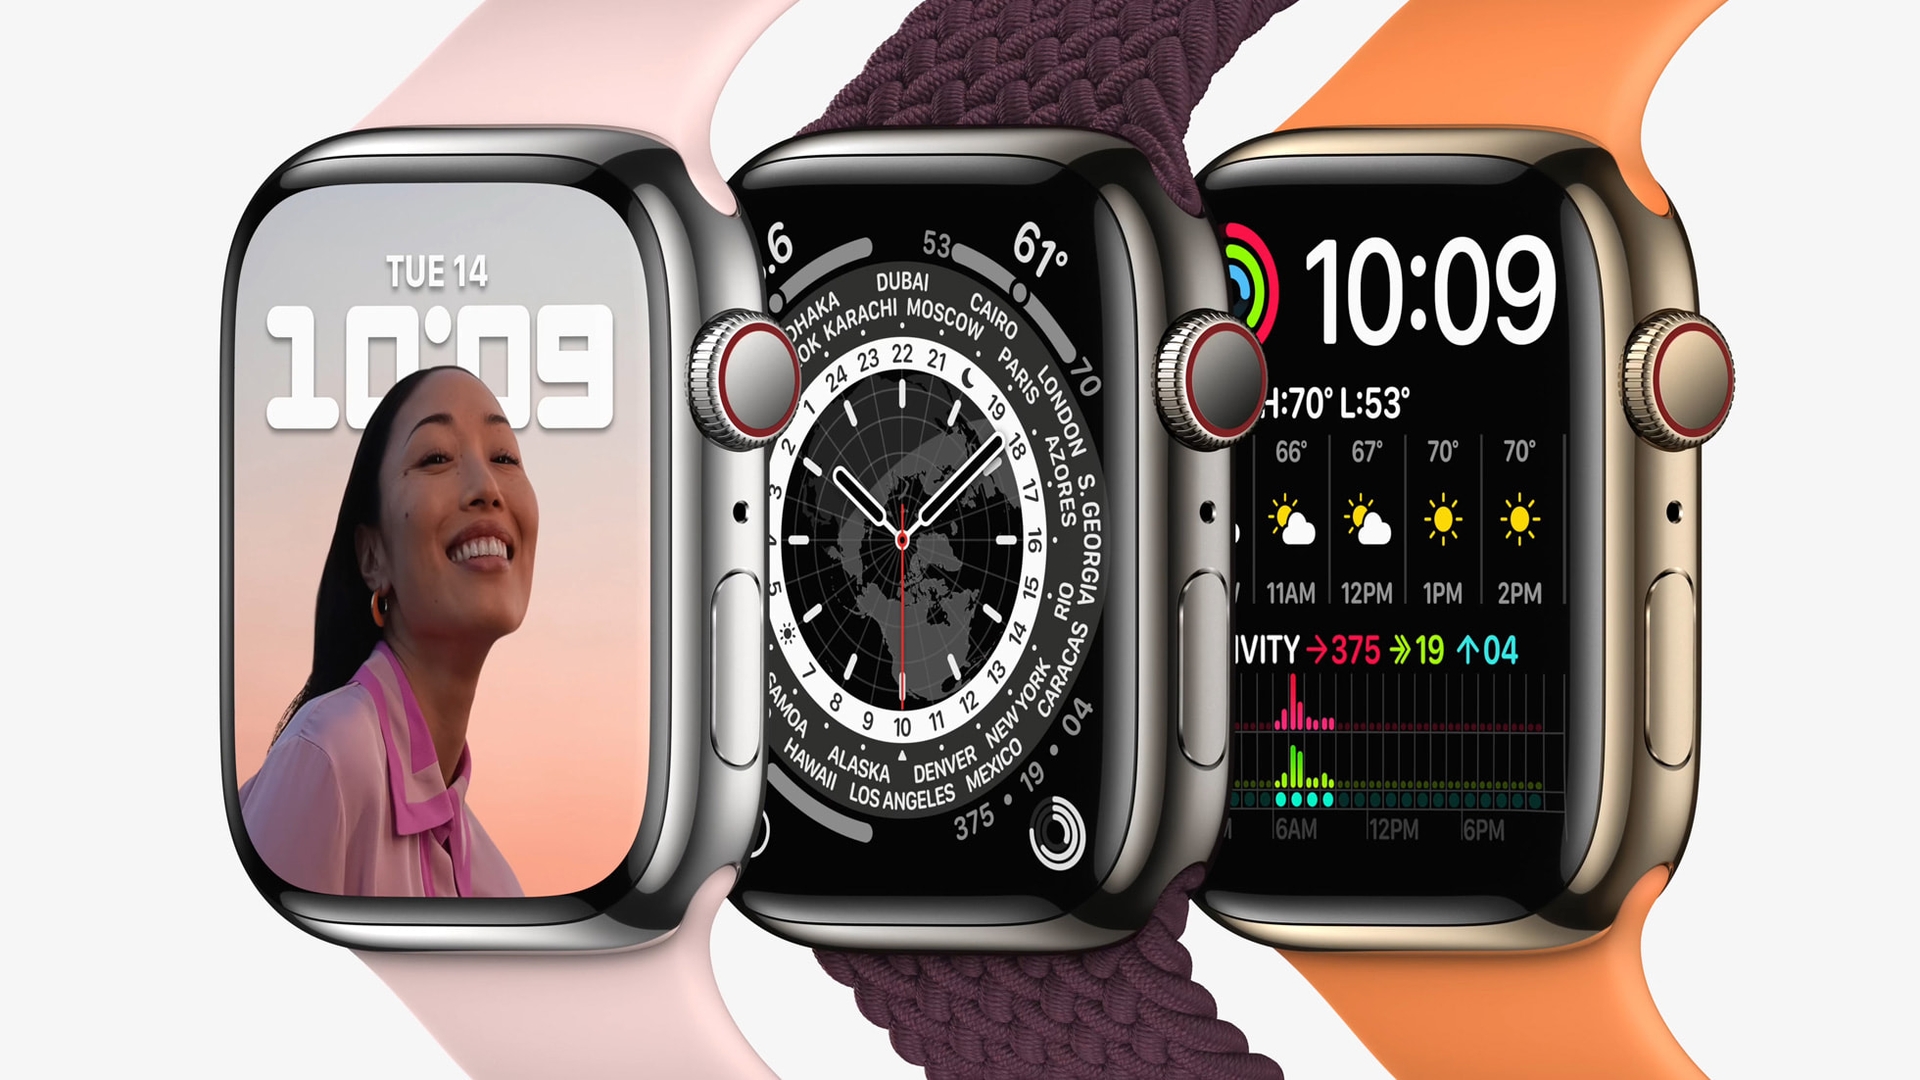 In this article, we are going to go over our Apple Watch comparison chart, giving you our opinion on how they compare, and which one is worth the price tag.